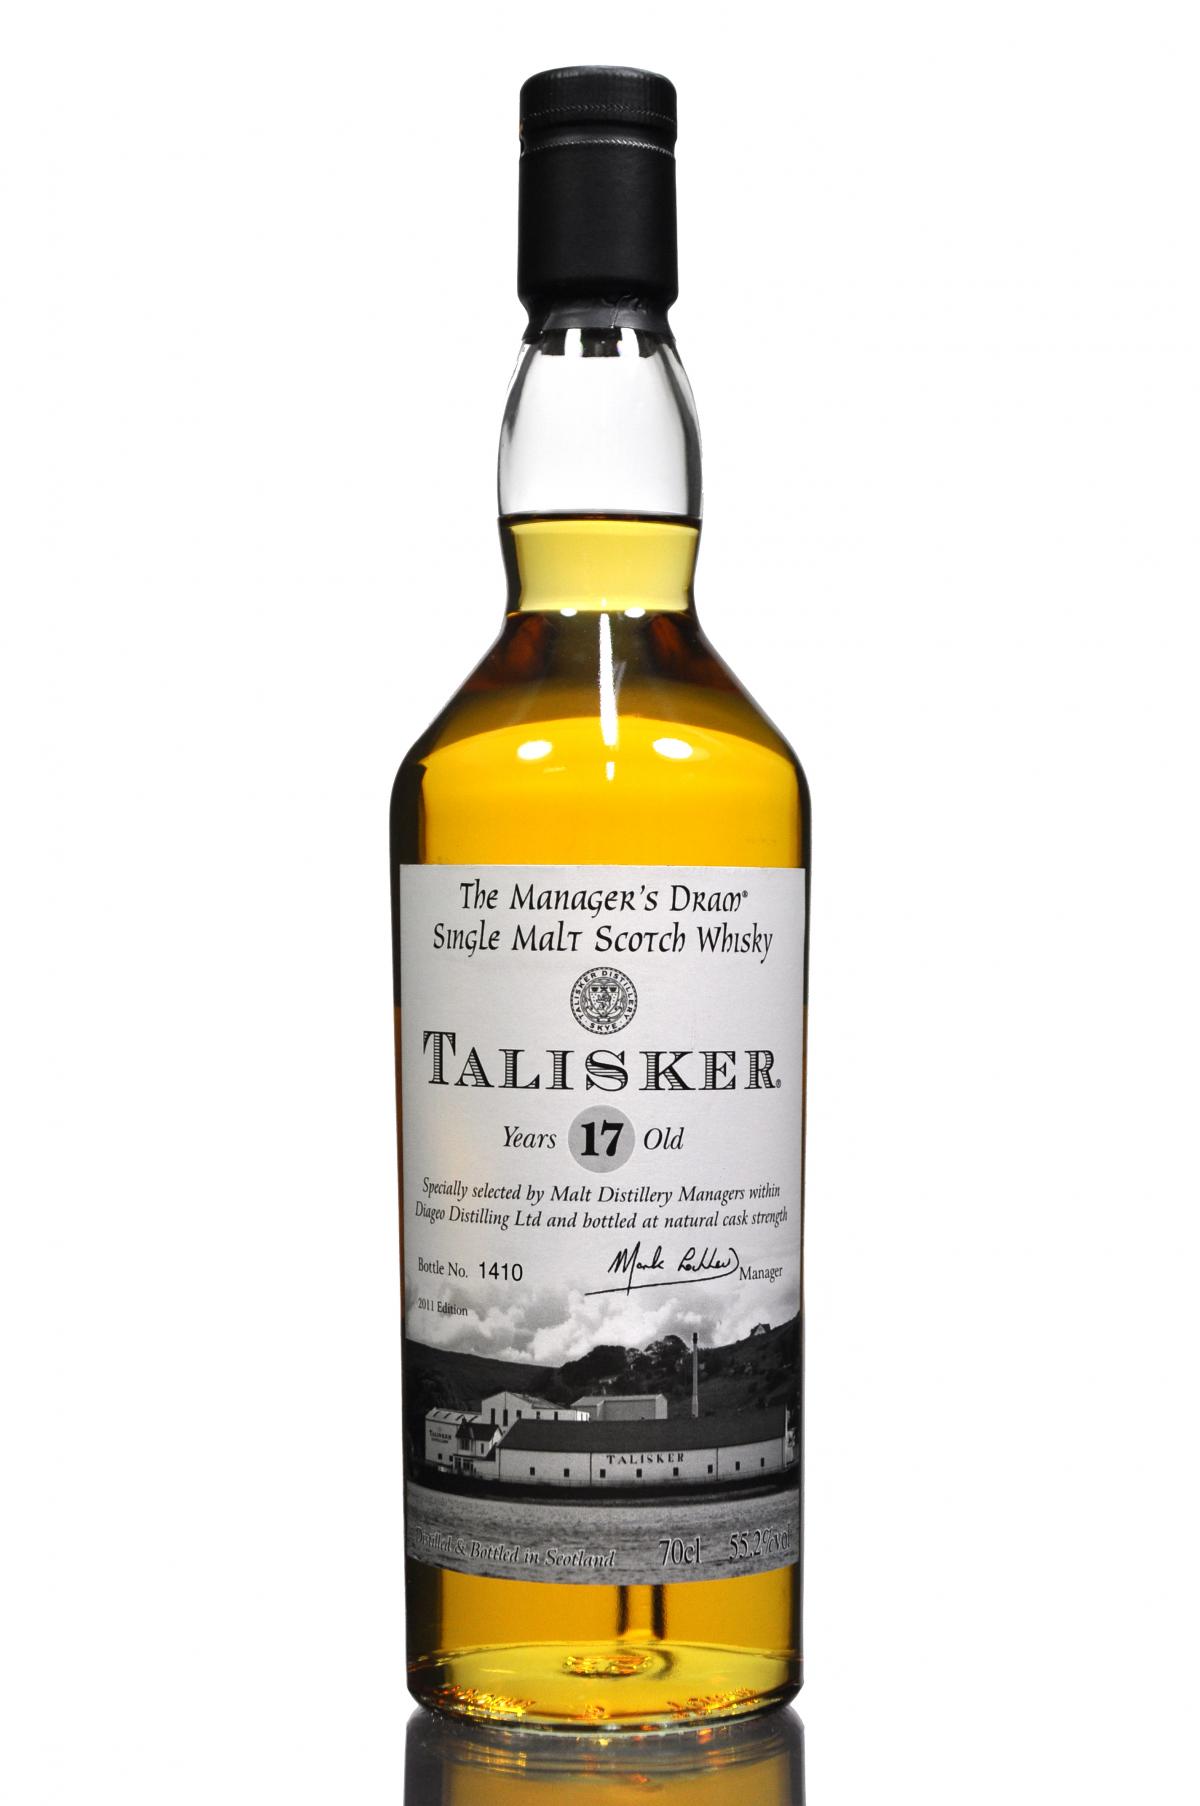 Talisker 17 Year Old - Managers Dram 2011